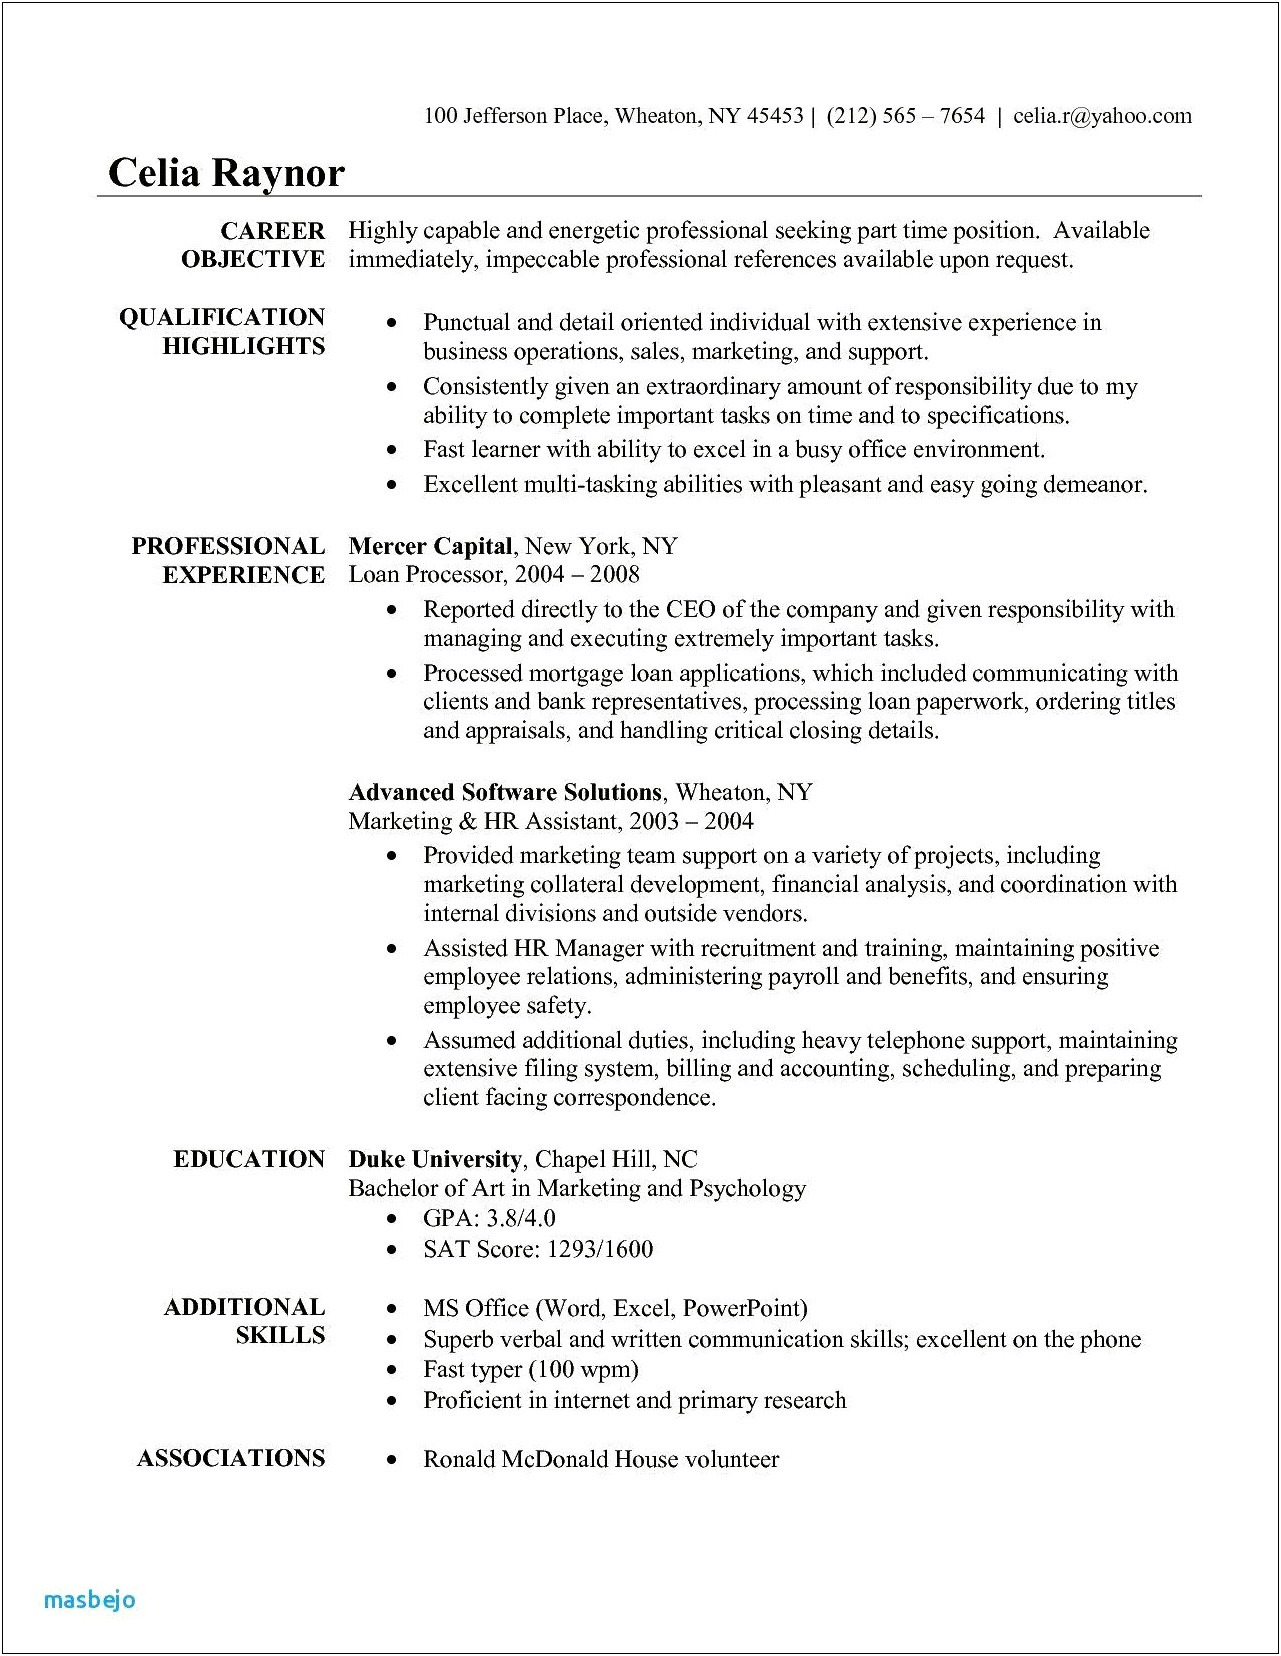 Quick Learning Skills On Resume